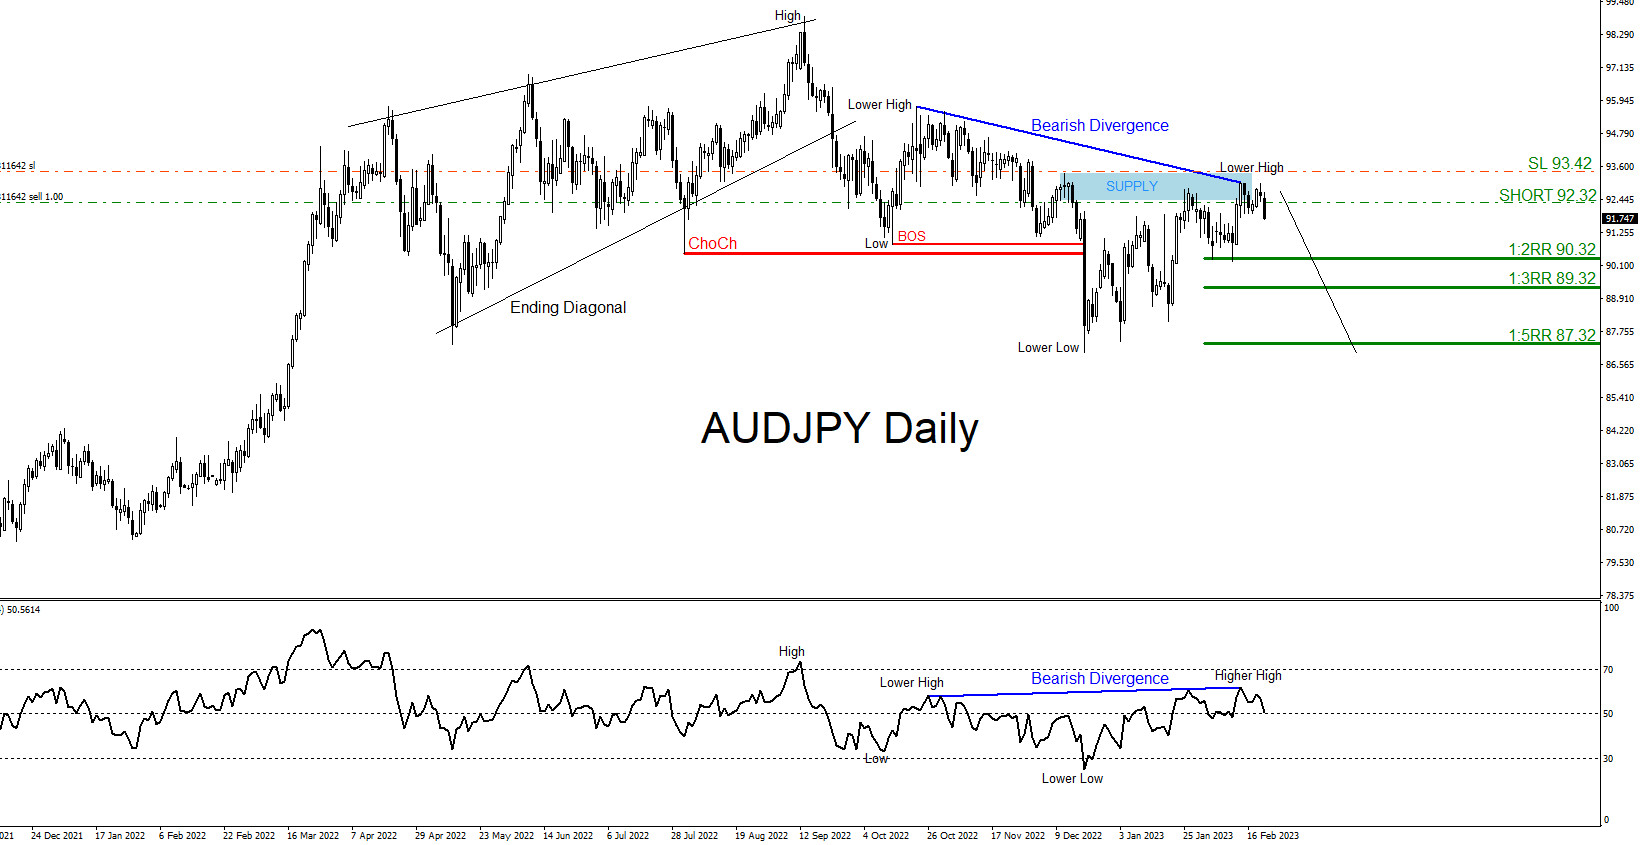 AUDJPY : Moved Lower as Expected